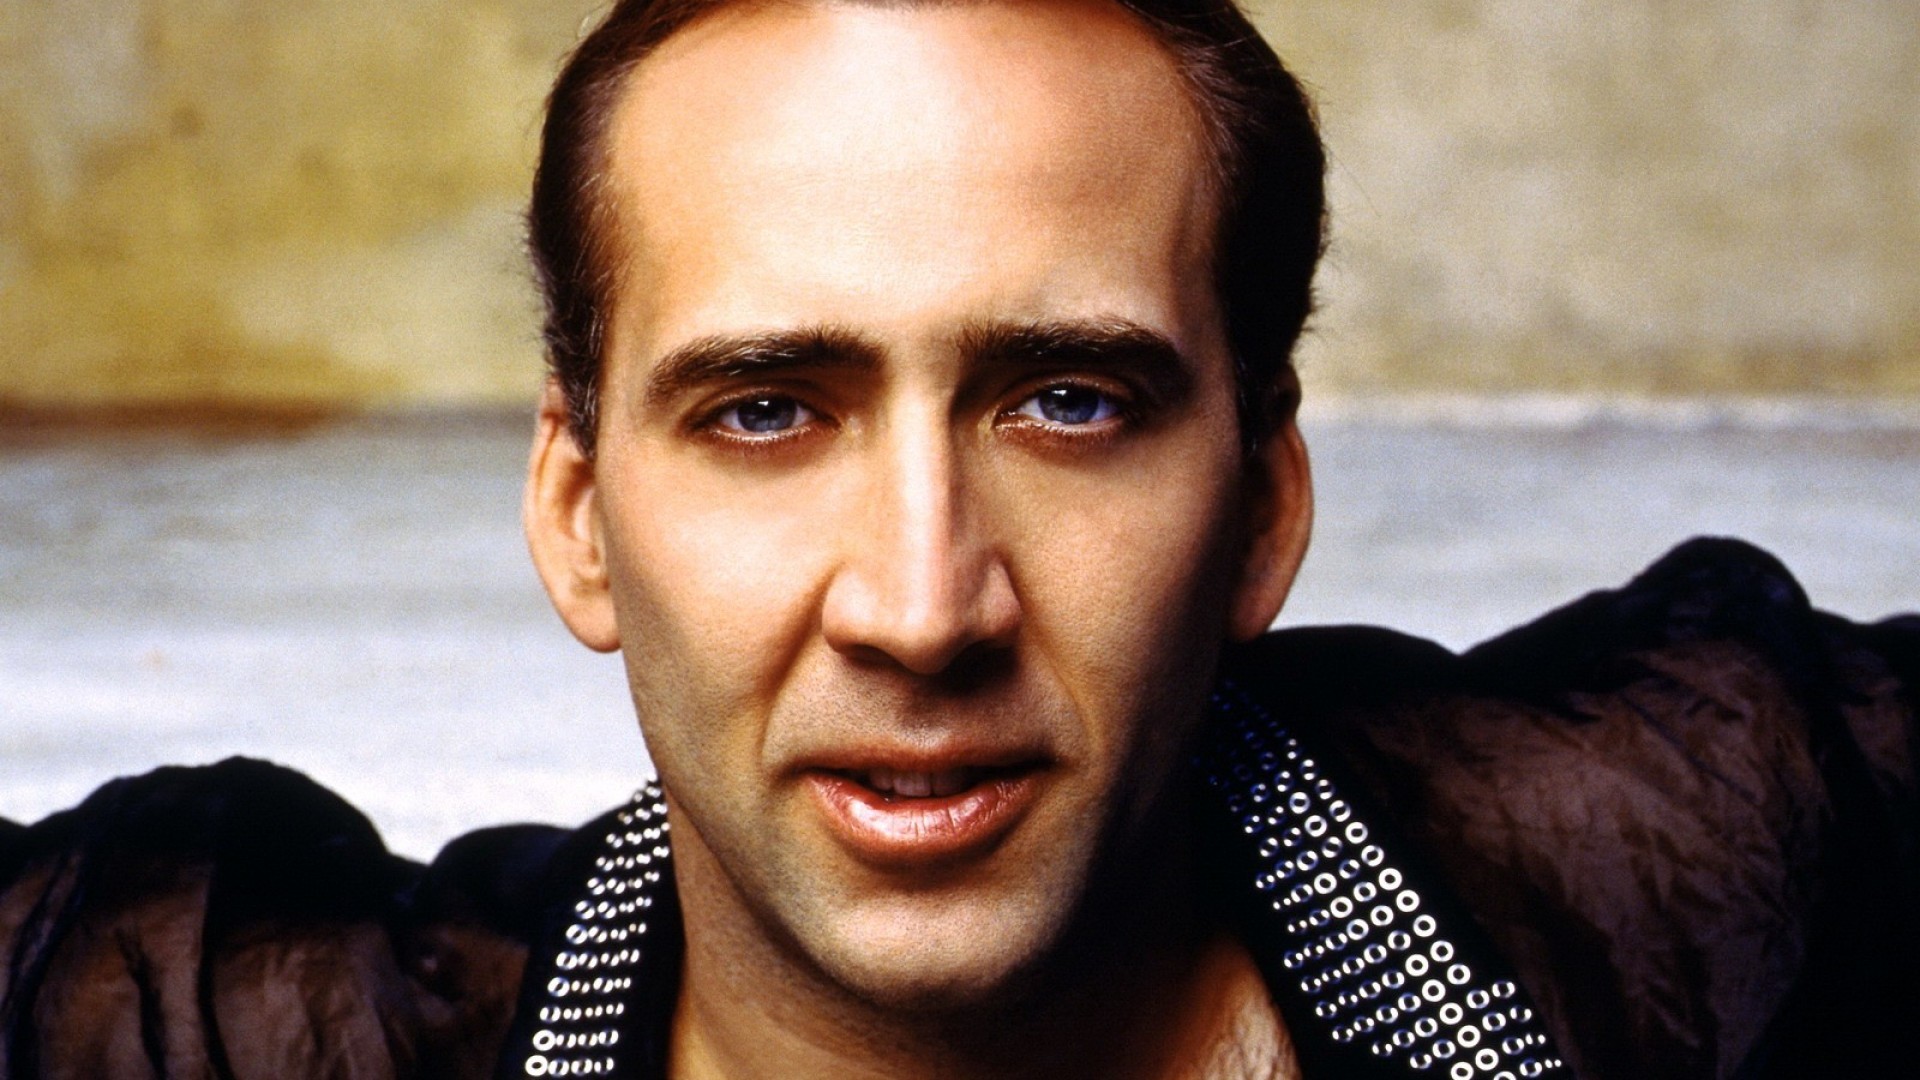 Nicolas Cage You Dont Say wallpaper meme collage Funny full frame  backgrounds  Nicolas cage Said wallpaper Funny wallpapers